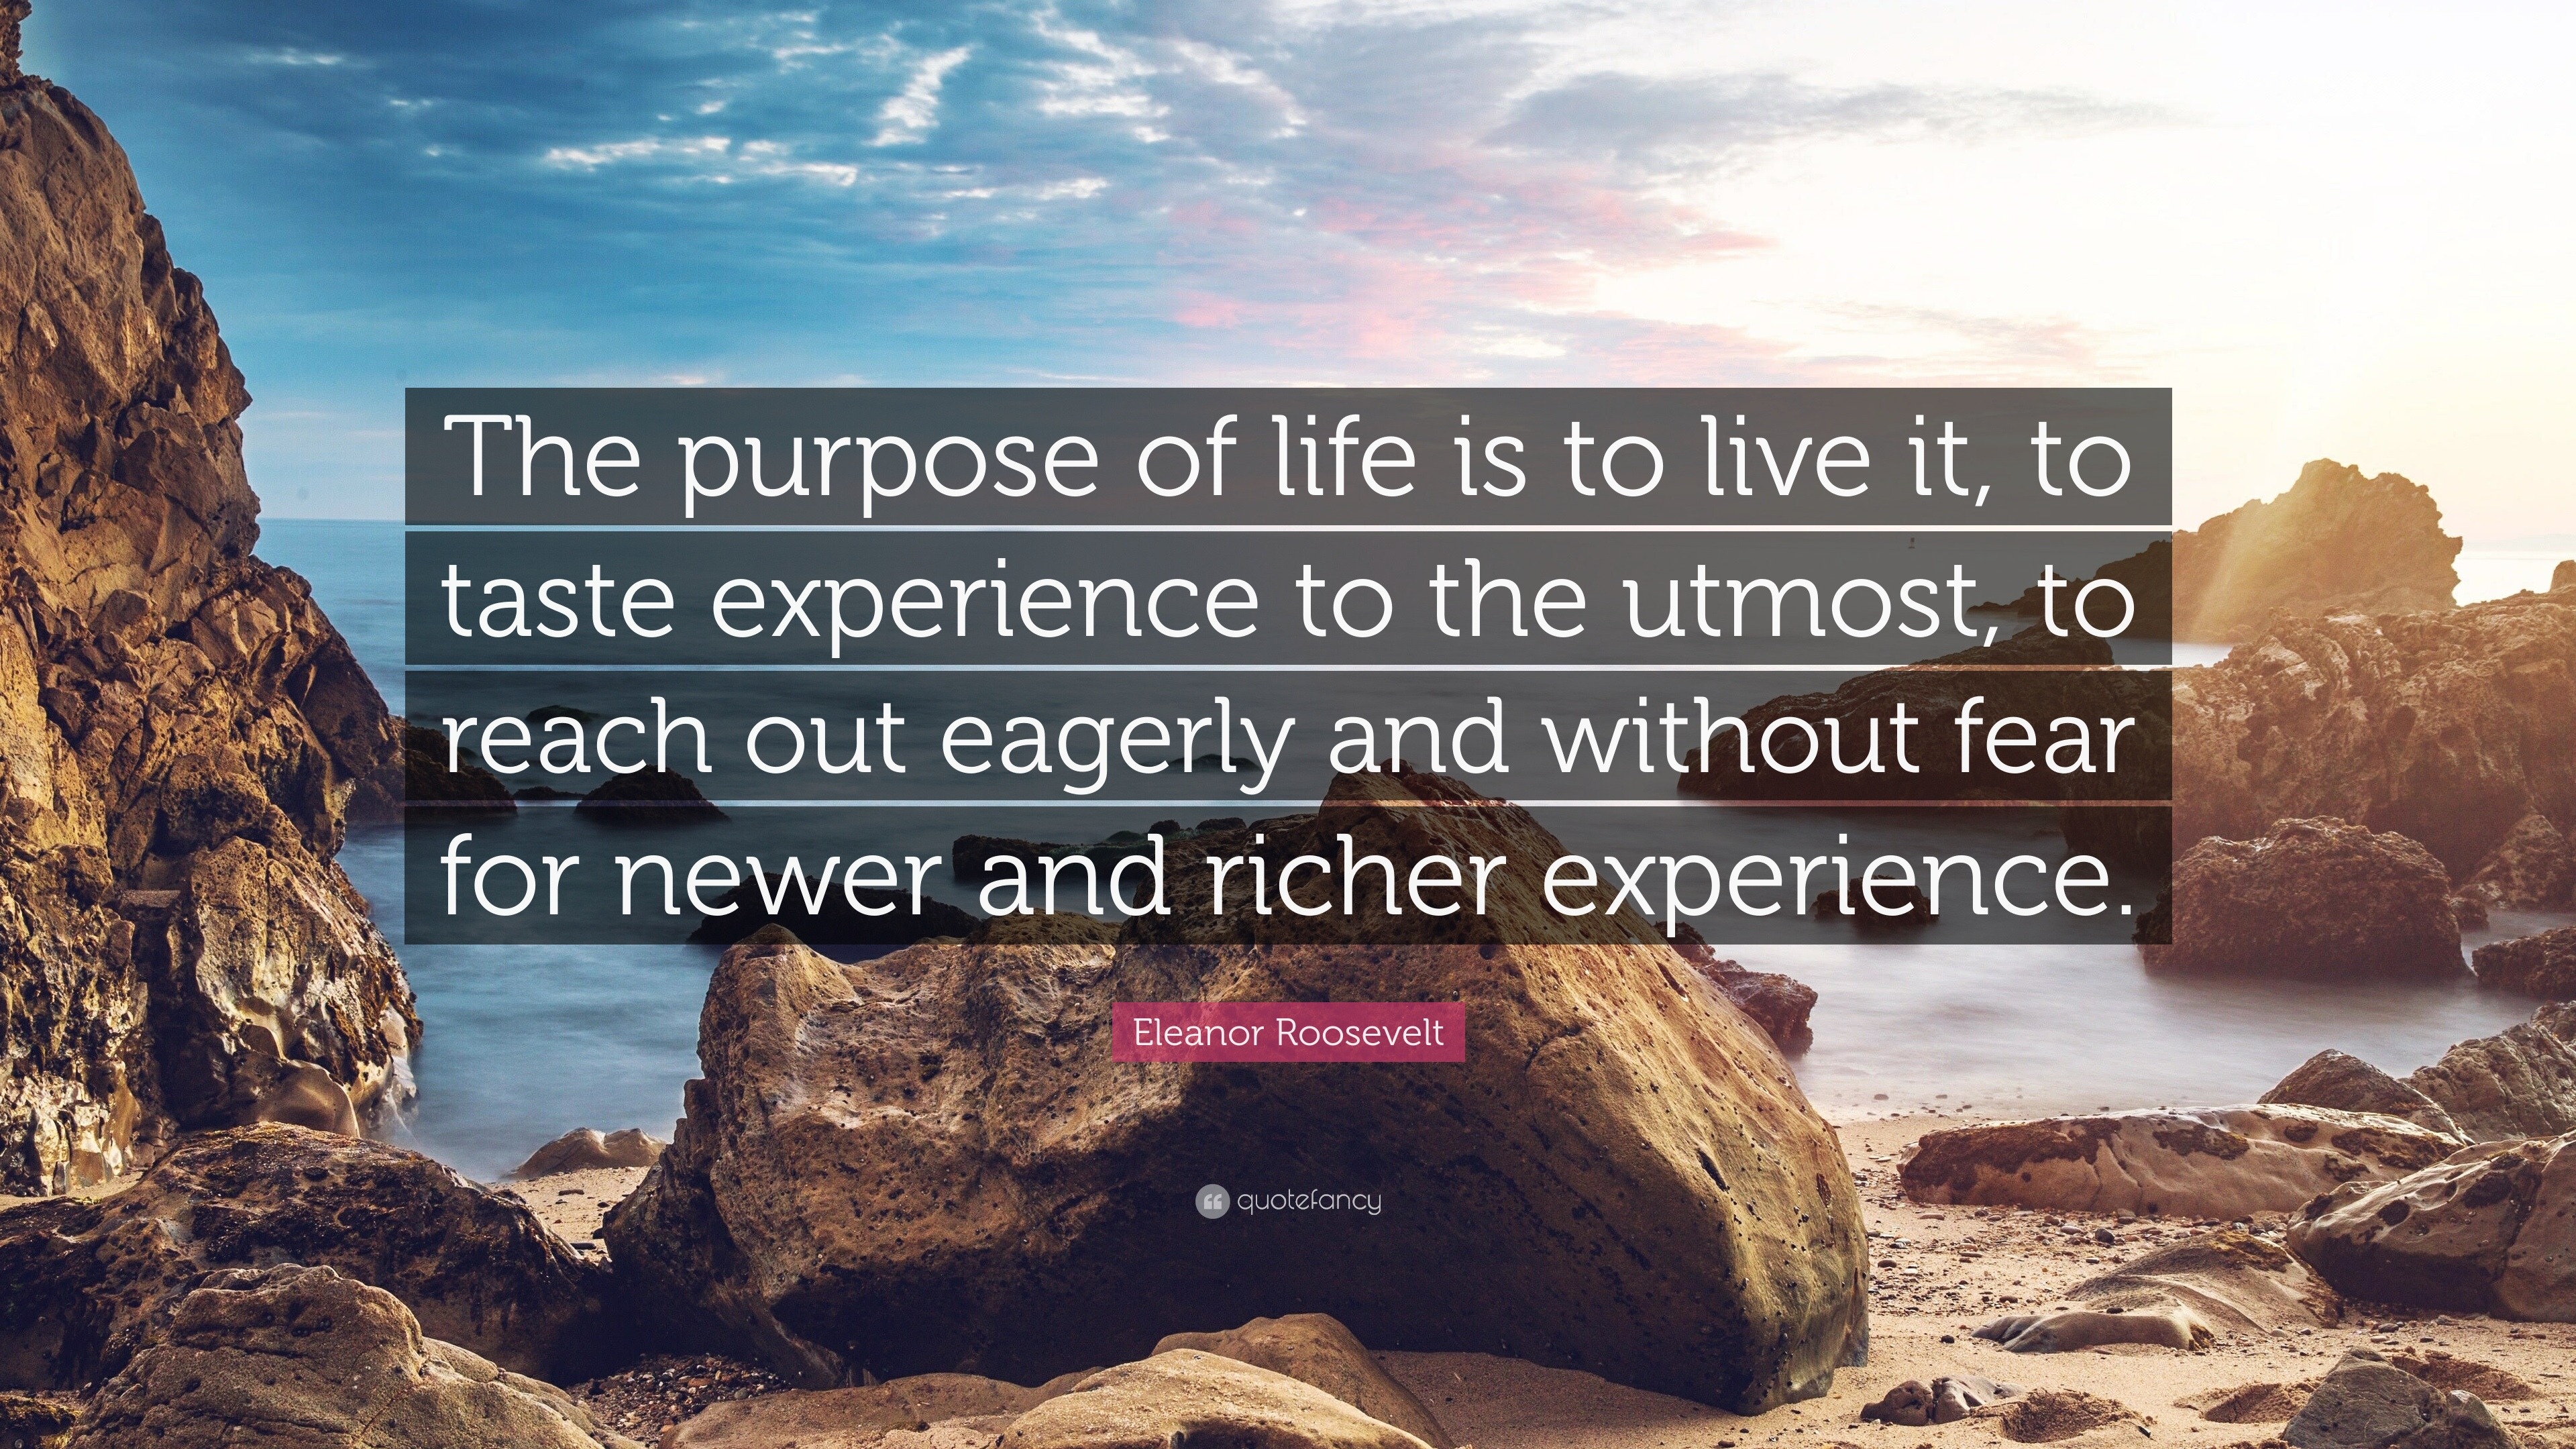 eleanor-roosevelt-quote-the-purpose-of-life-is-to-live-it-to-taste